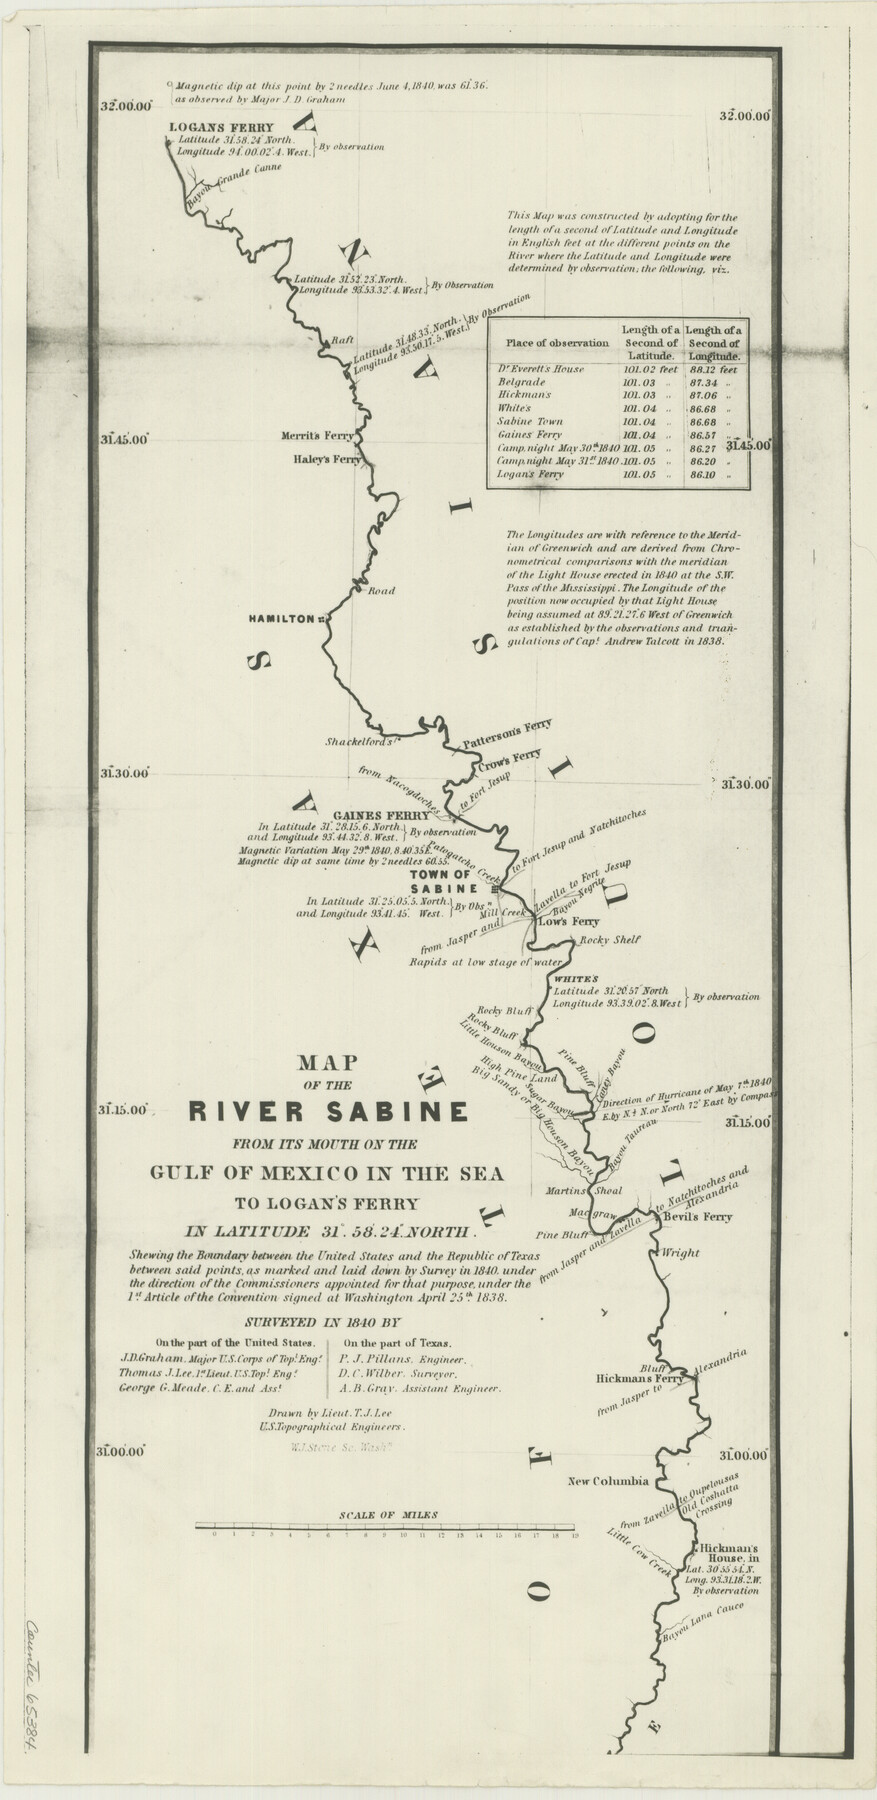 65384, Map of the River Sabine from its mouth on the Gulf of Mexico in the sea to Logan's Ferry in latitude 31° 58' 24" north, General Map Collection